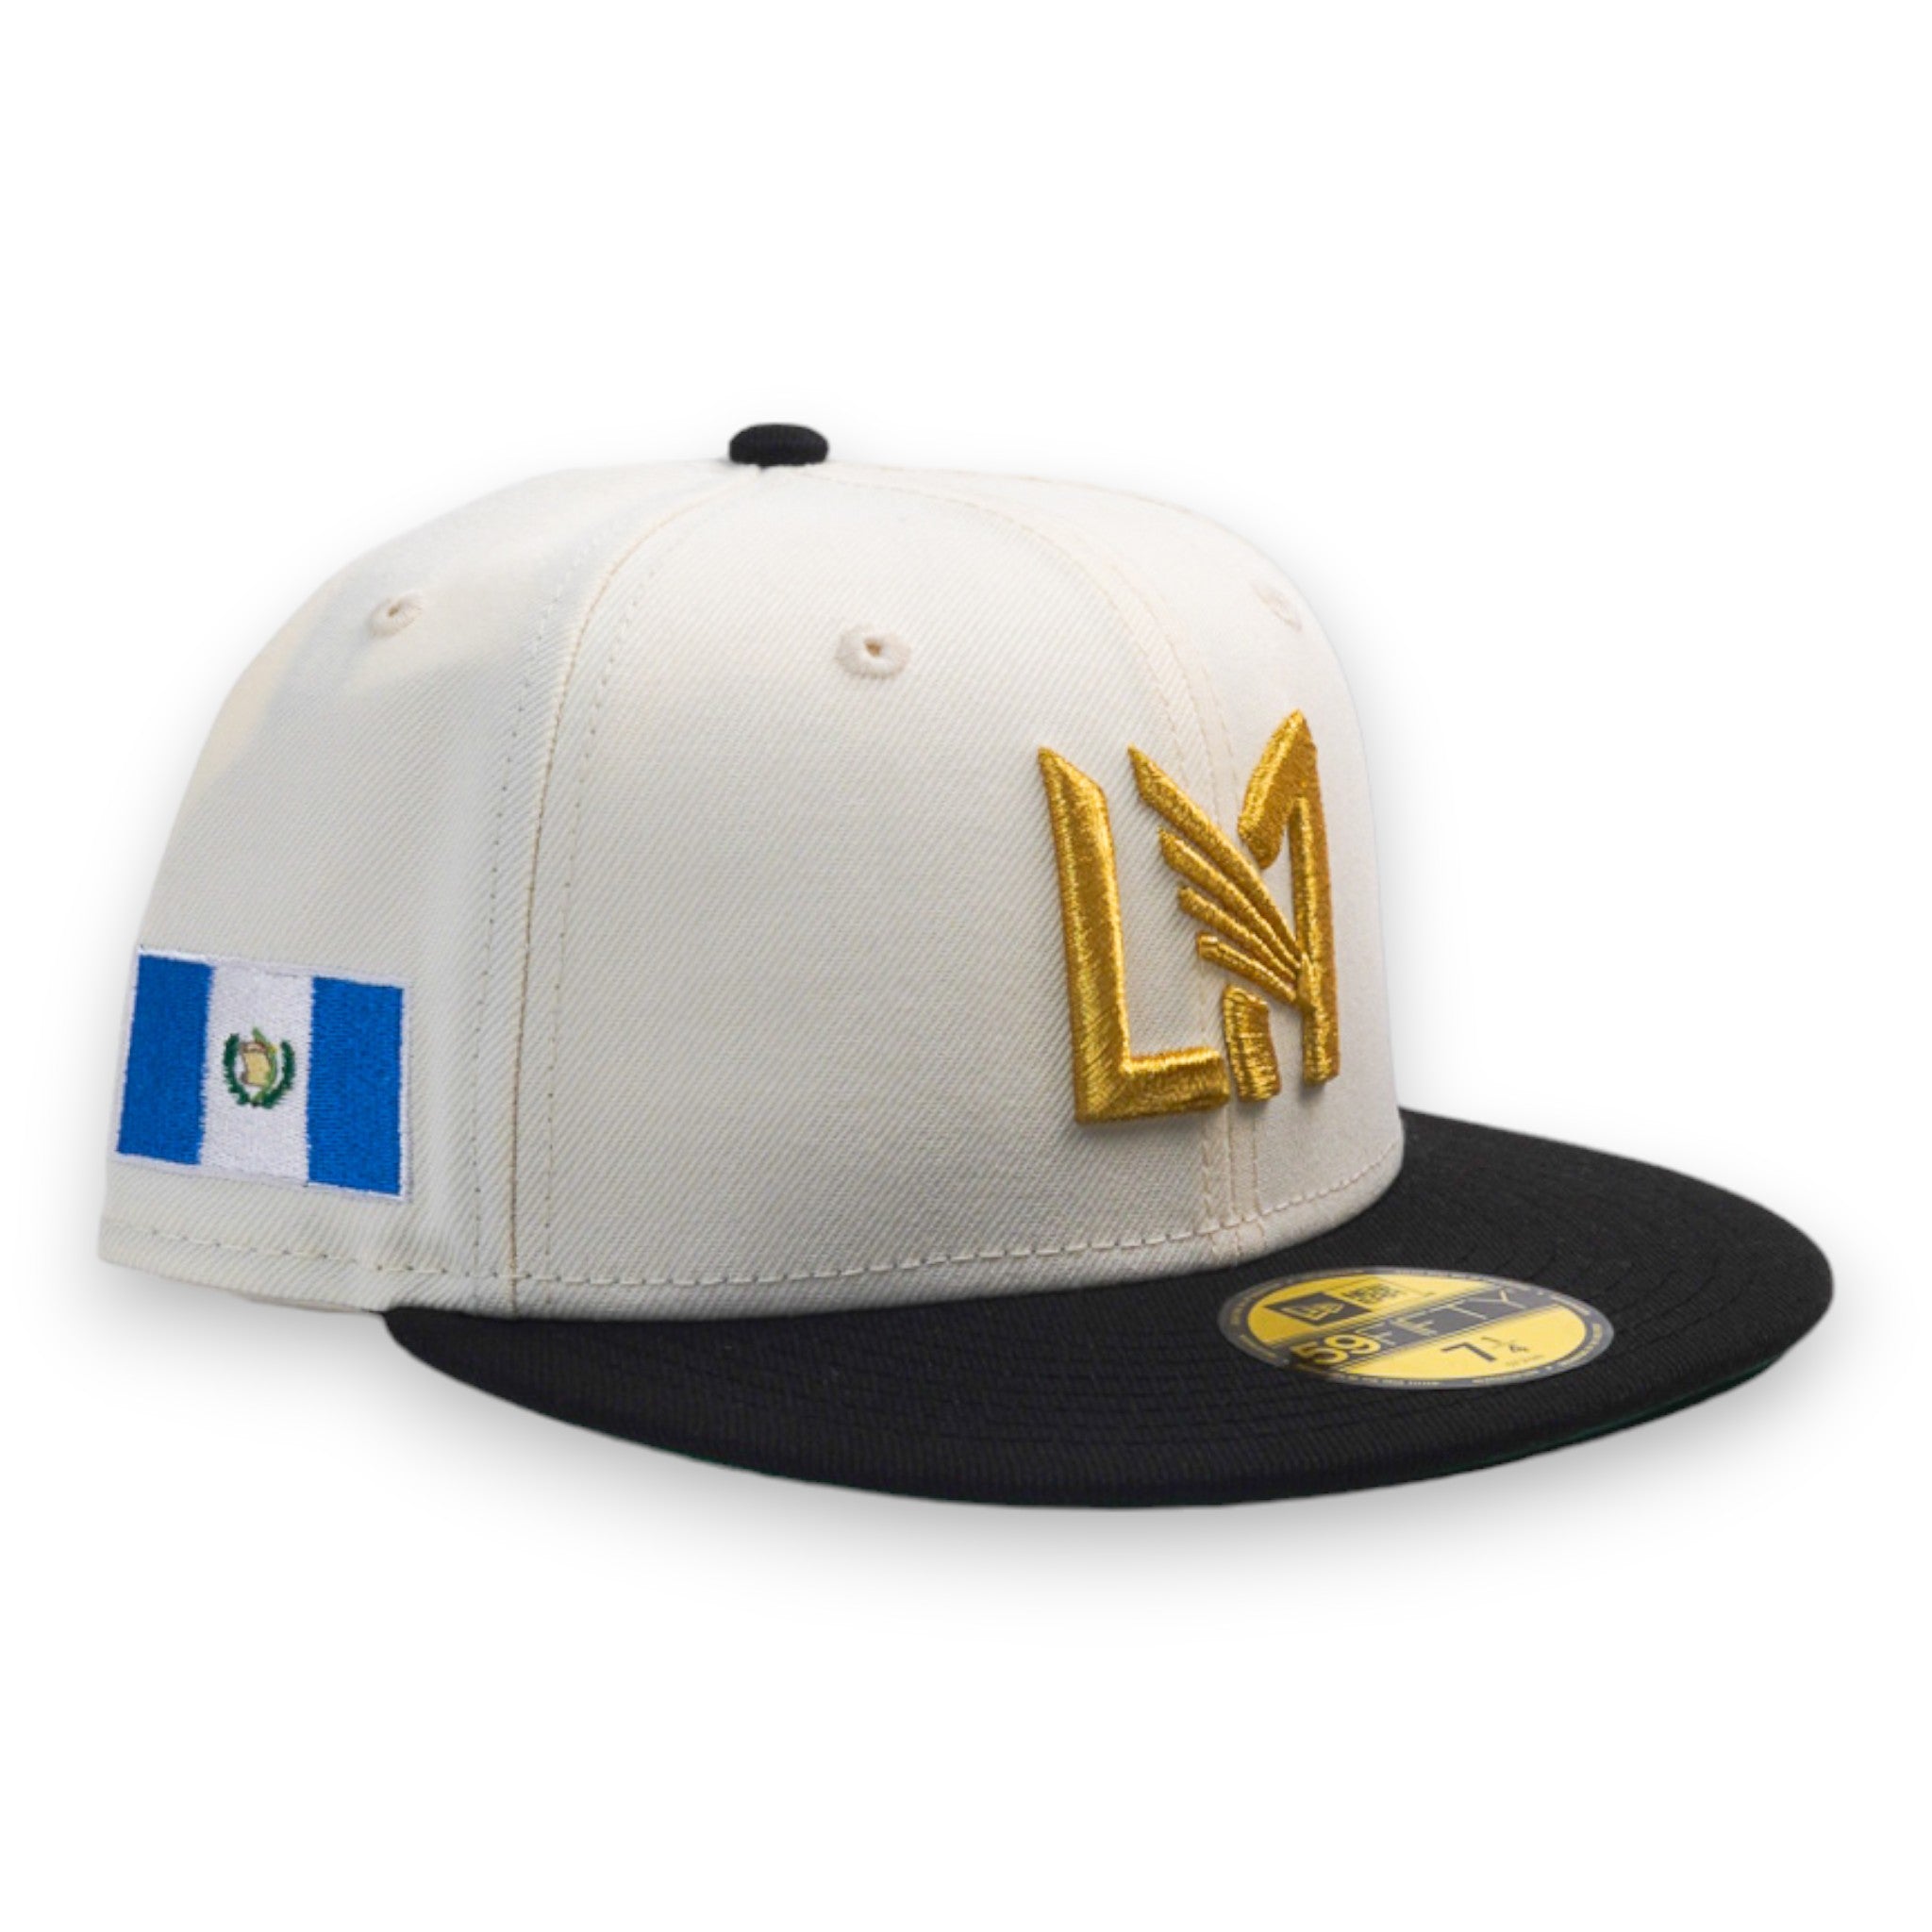 The Magnolia Park x New Era 59Fifty Fitted LAFC Heritage Collection (Guatemala Flag) (Chrome/Black)